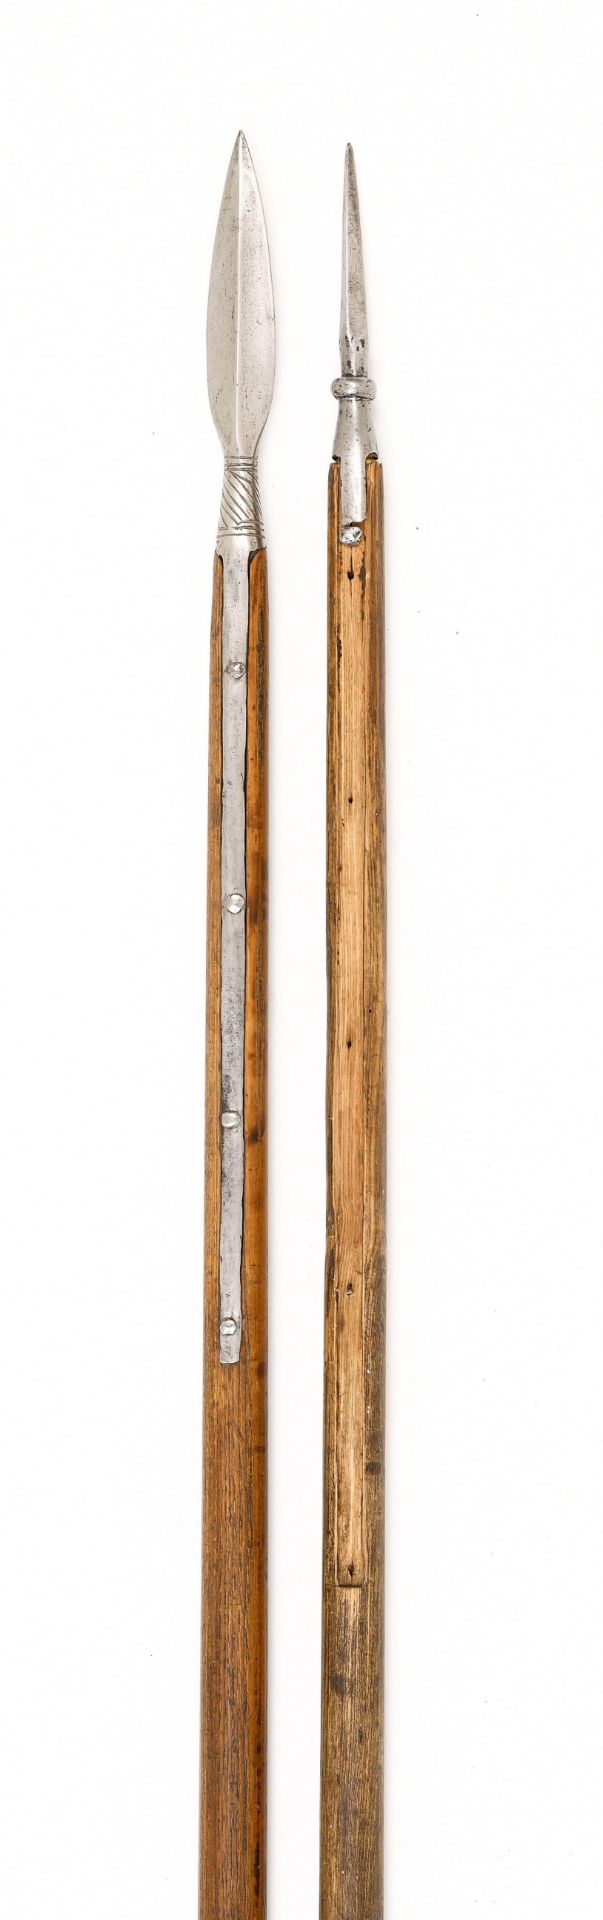 LOT OF TWO LONG SPEARS - Image 2 of 3